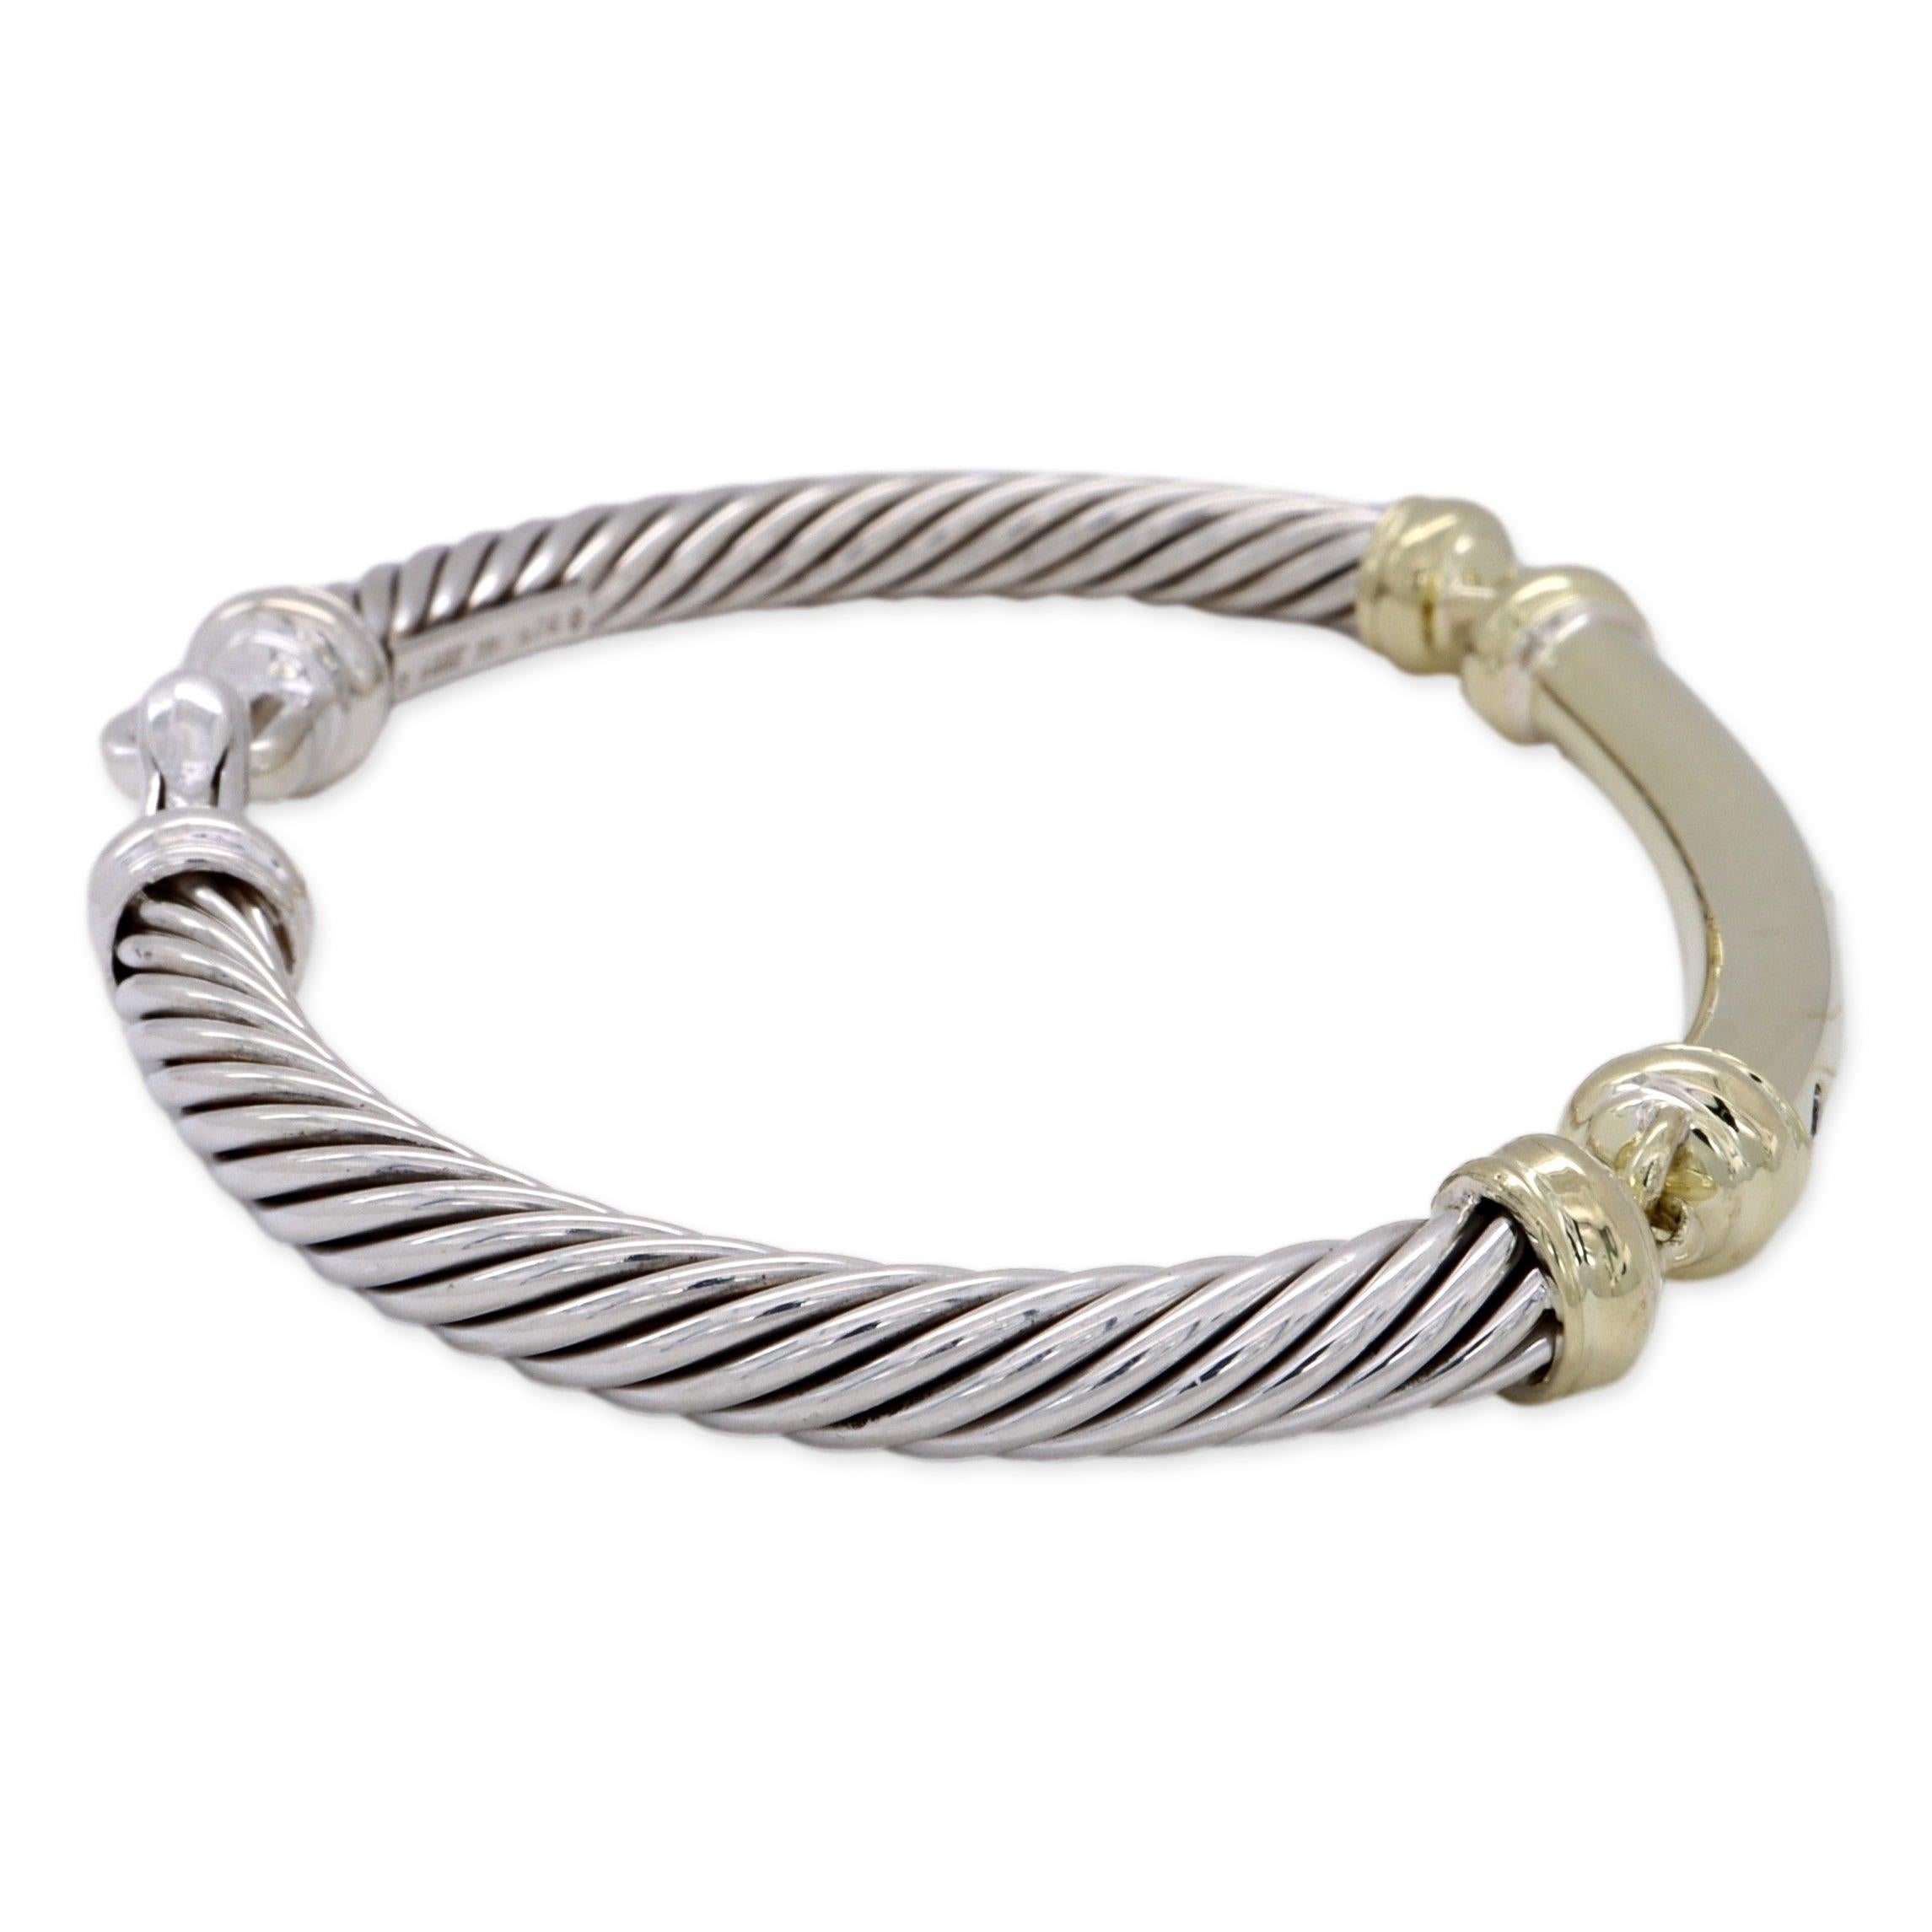 David Yurman two tone bracelet from the metro collection finely crafted in sterling silver in a cable twist design featuring a 14 karat yellow gold bar with 5 burnished set round brilliant cut diamonds weighing 0.15 cts approximately. The bracelet